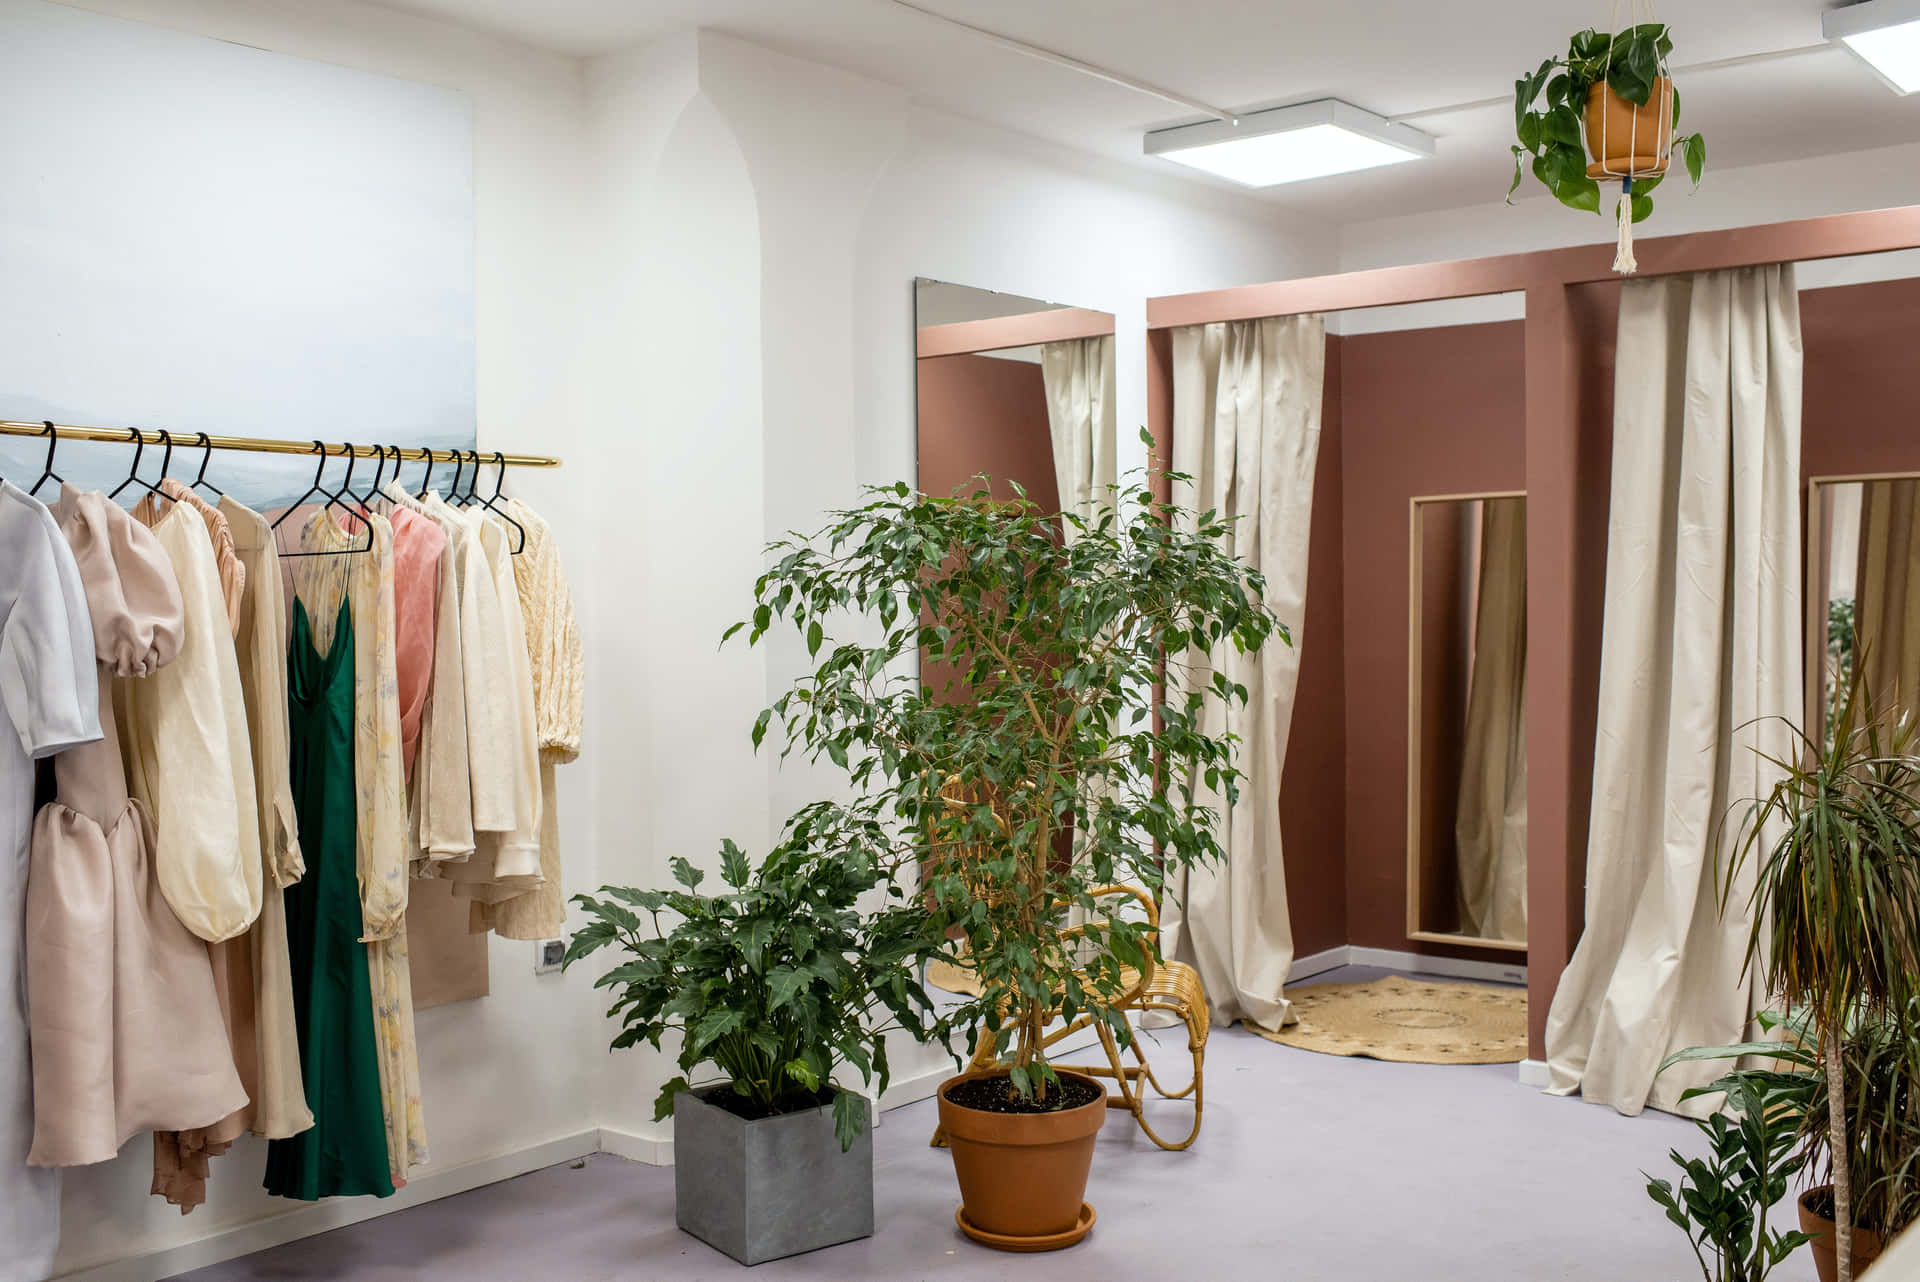 A Room With Clothes Hanging On Racks And Plants